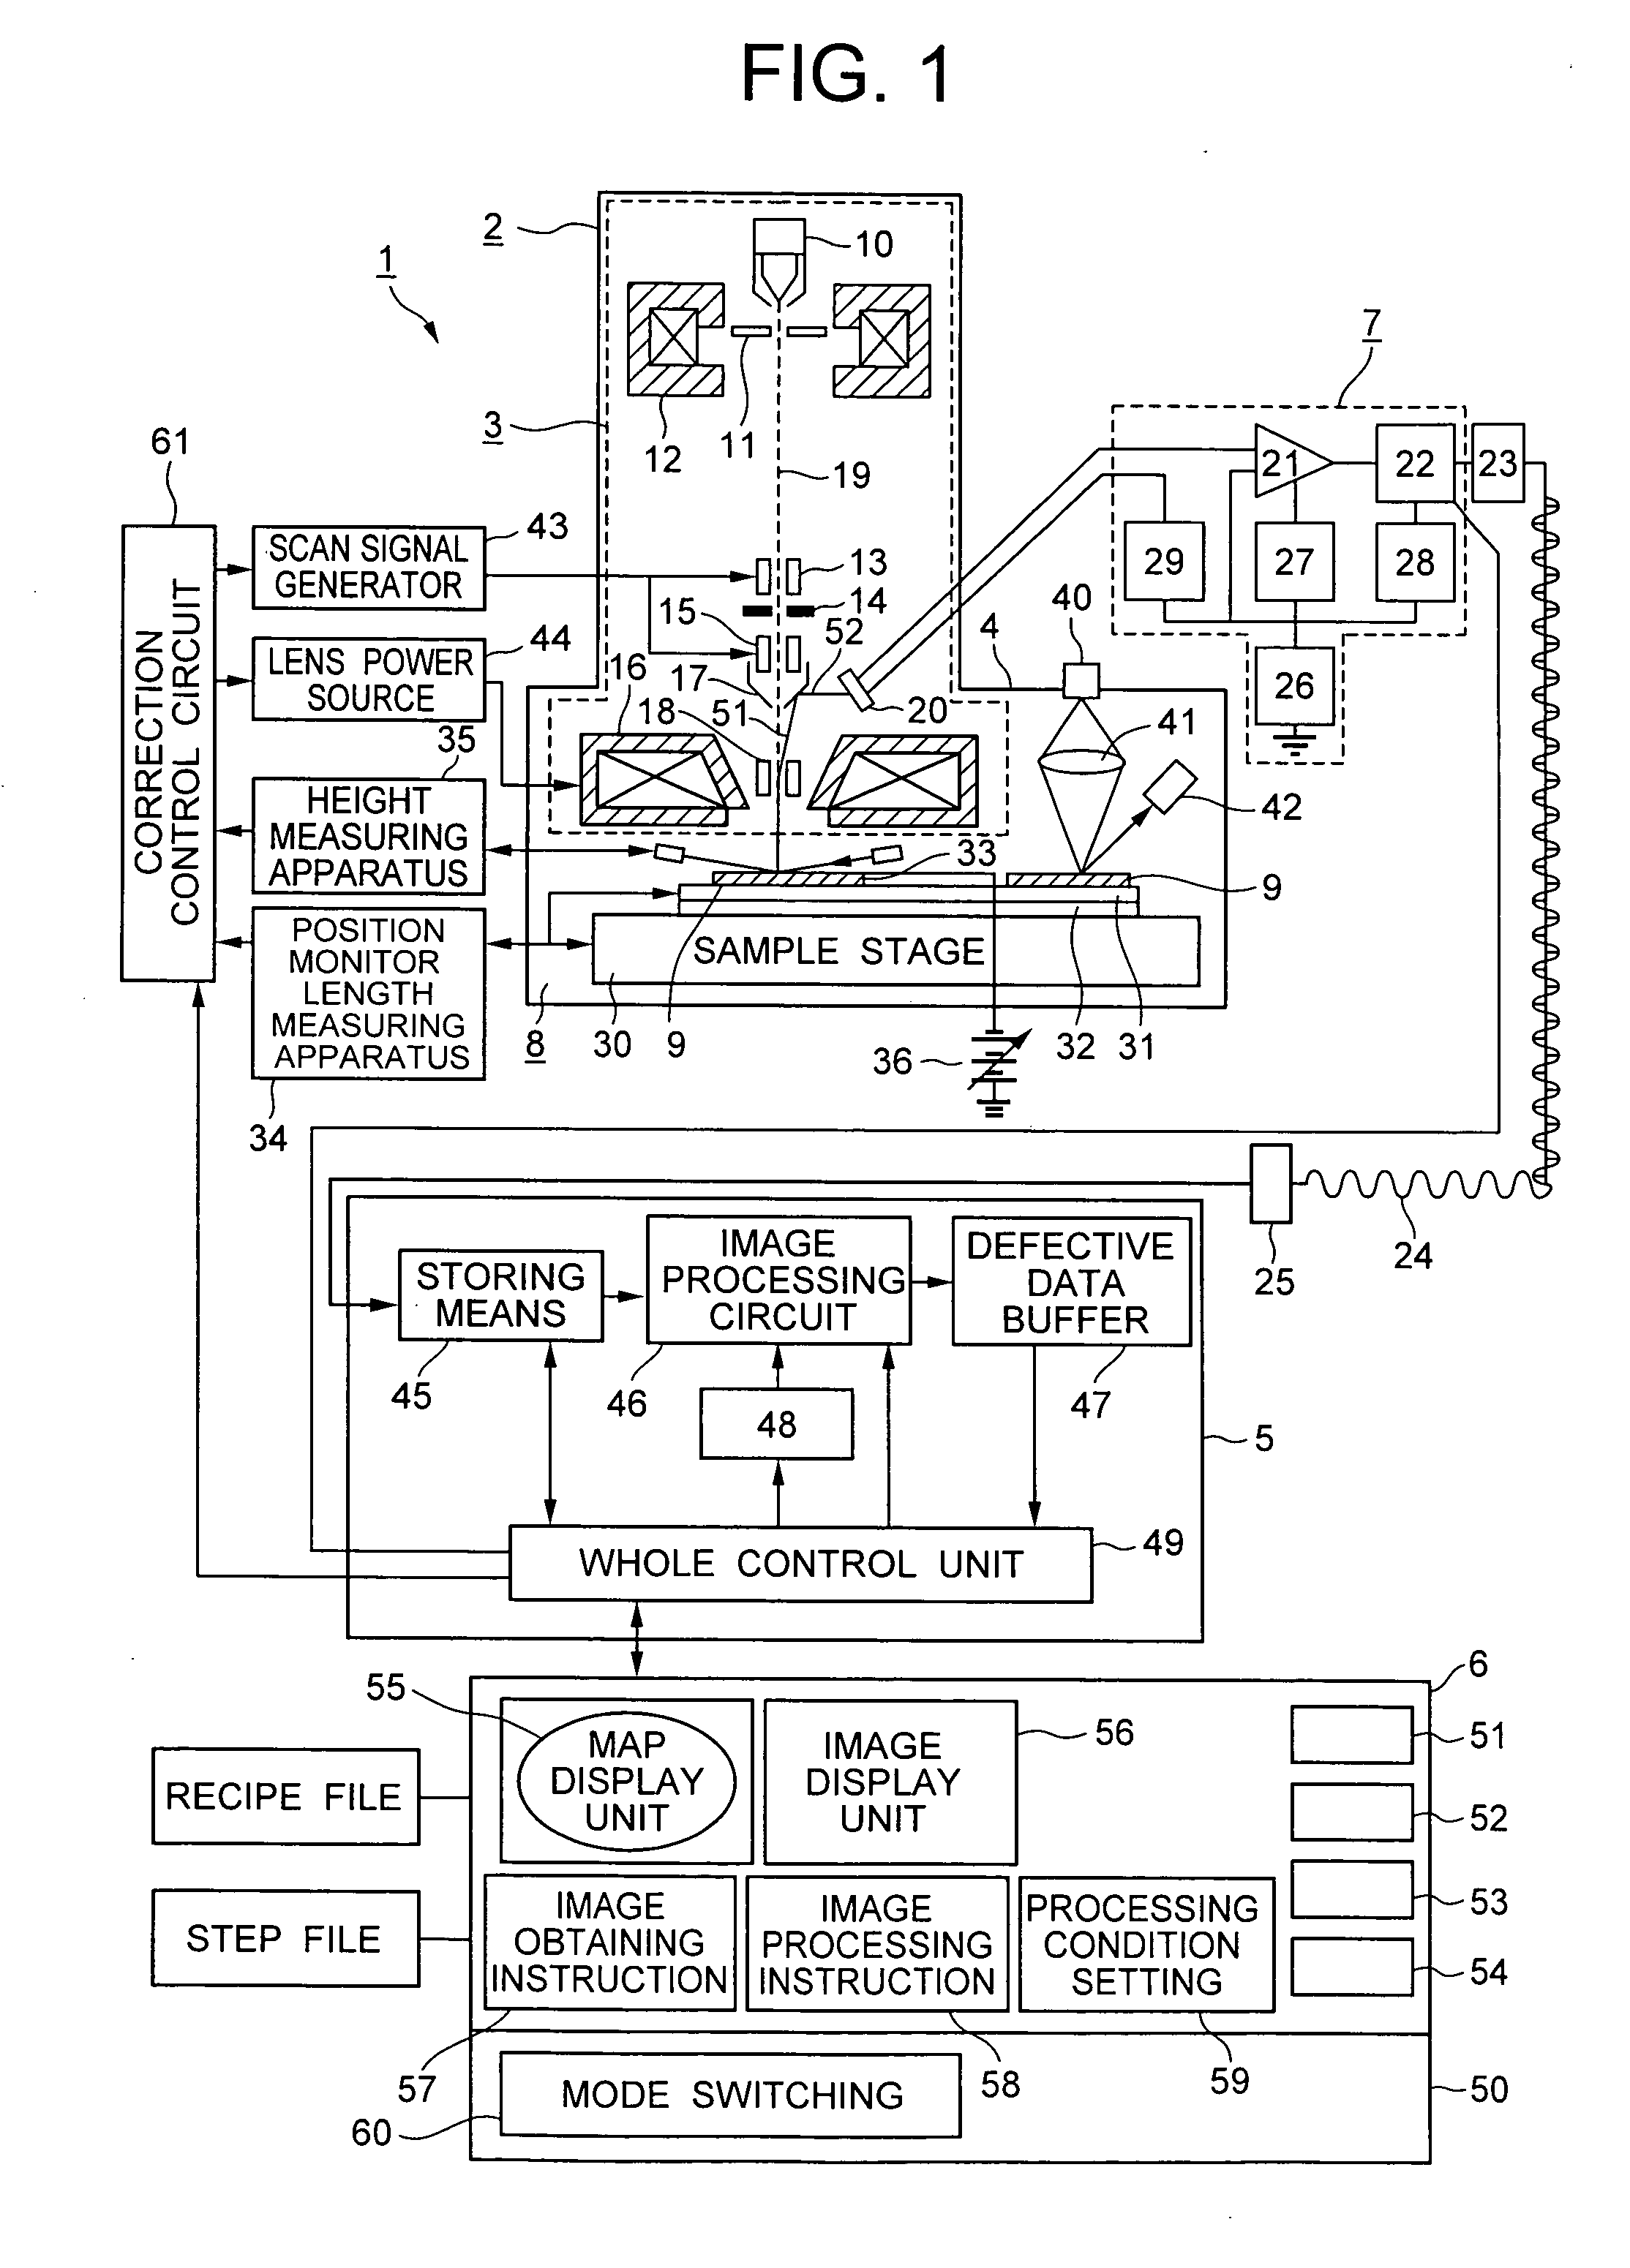 Inspection apparatus for inspecting patterns of a substrate